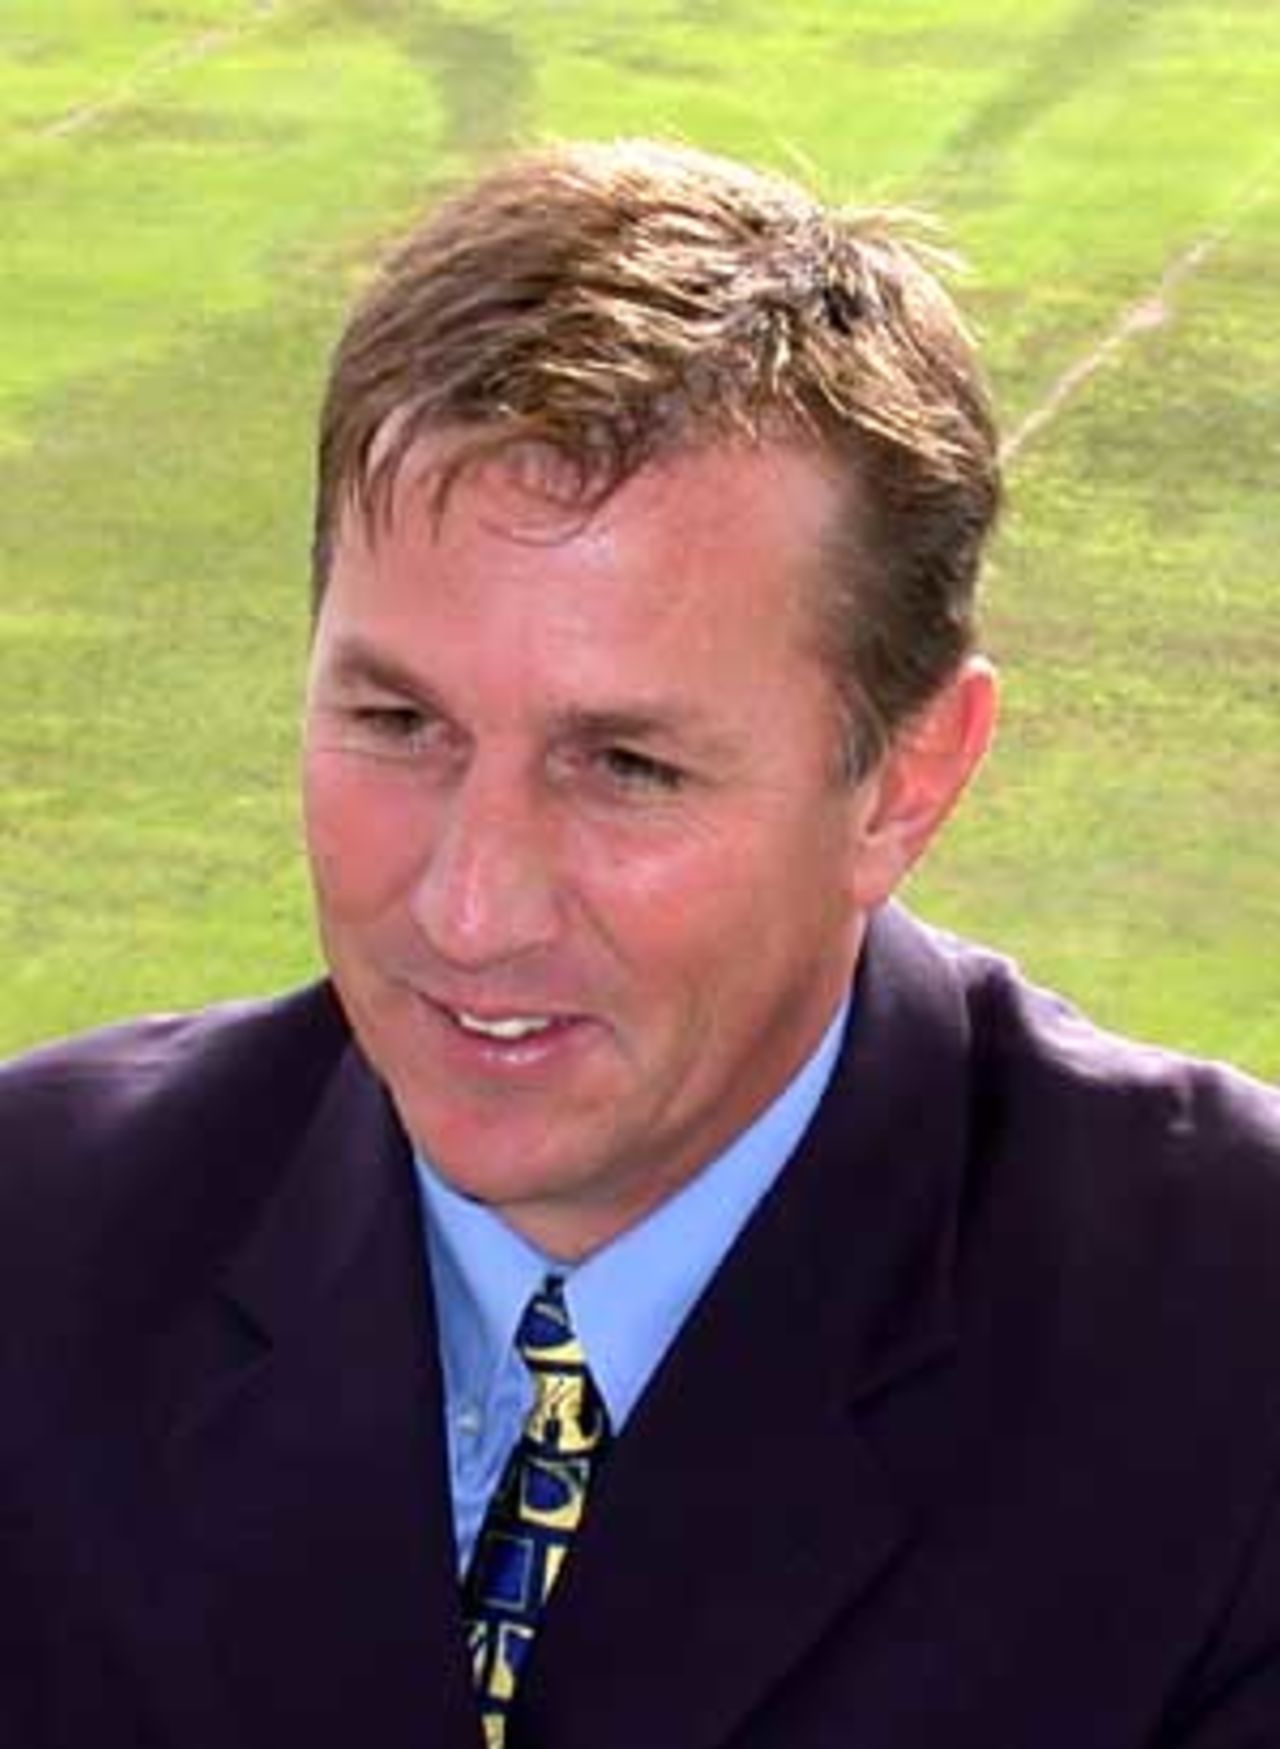 Simons was appointed in June 2002